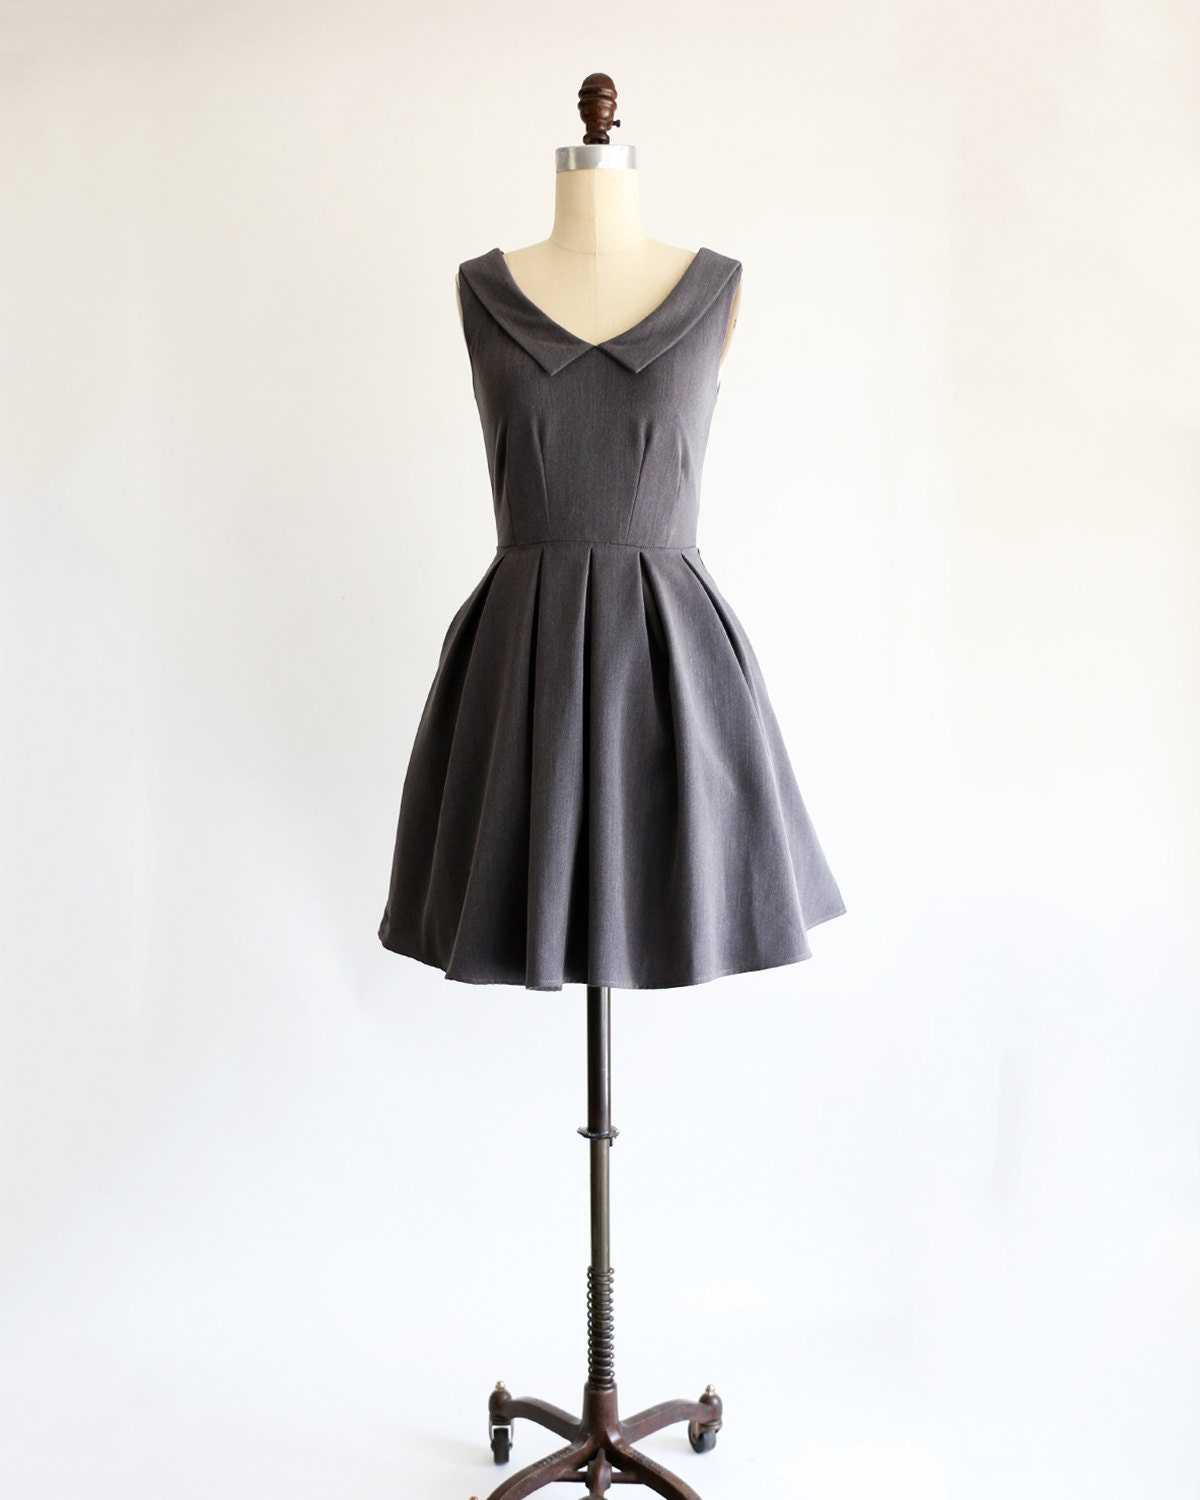 SUNDAY Charcoal dark charcoal gray pointed collar dress.